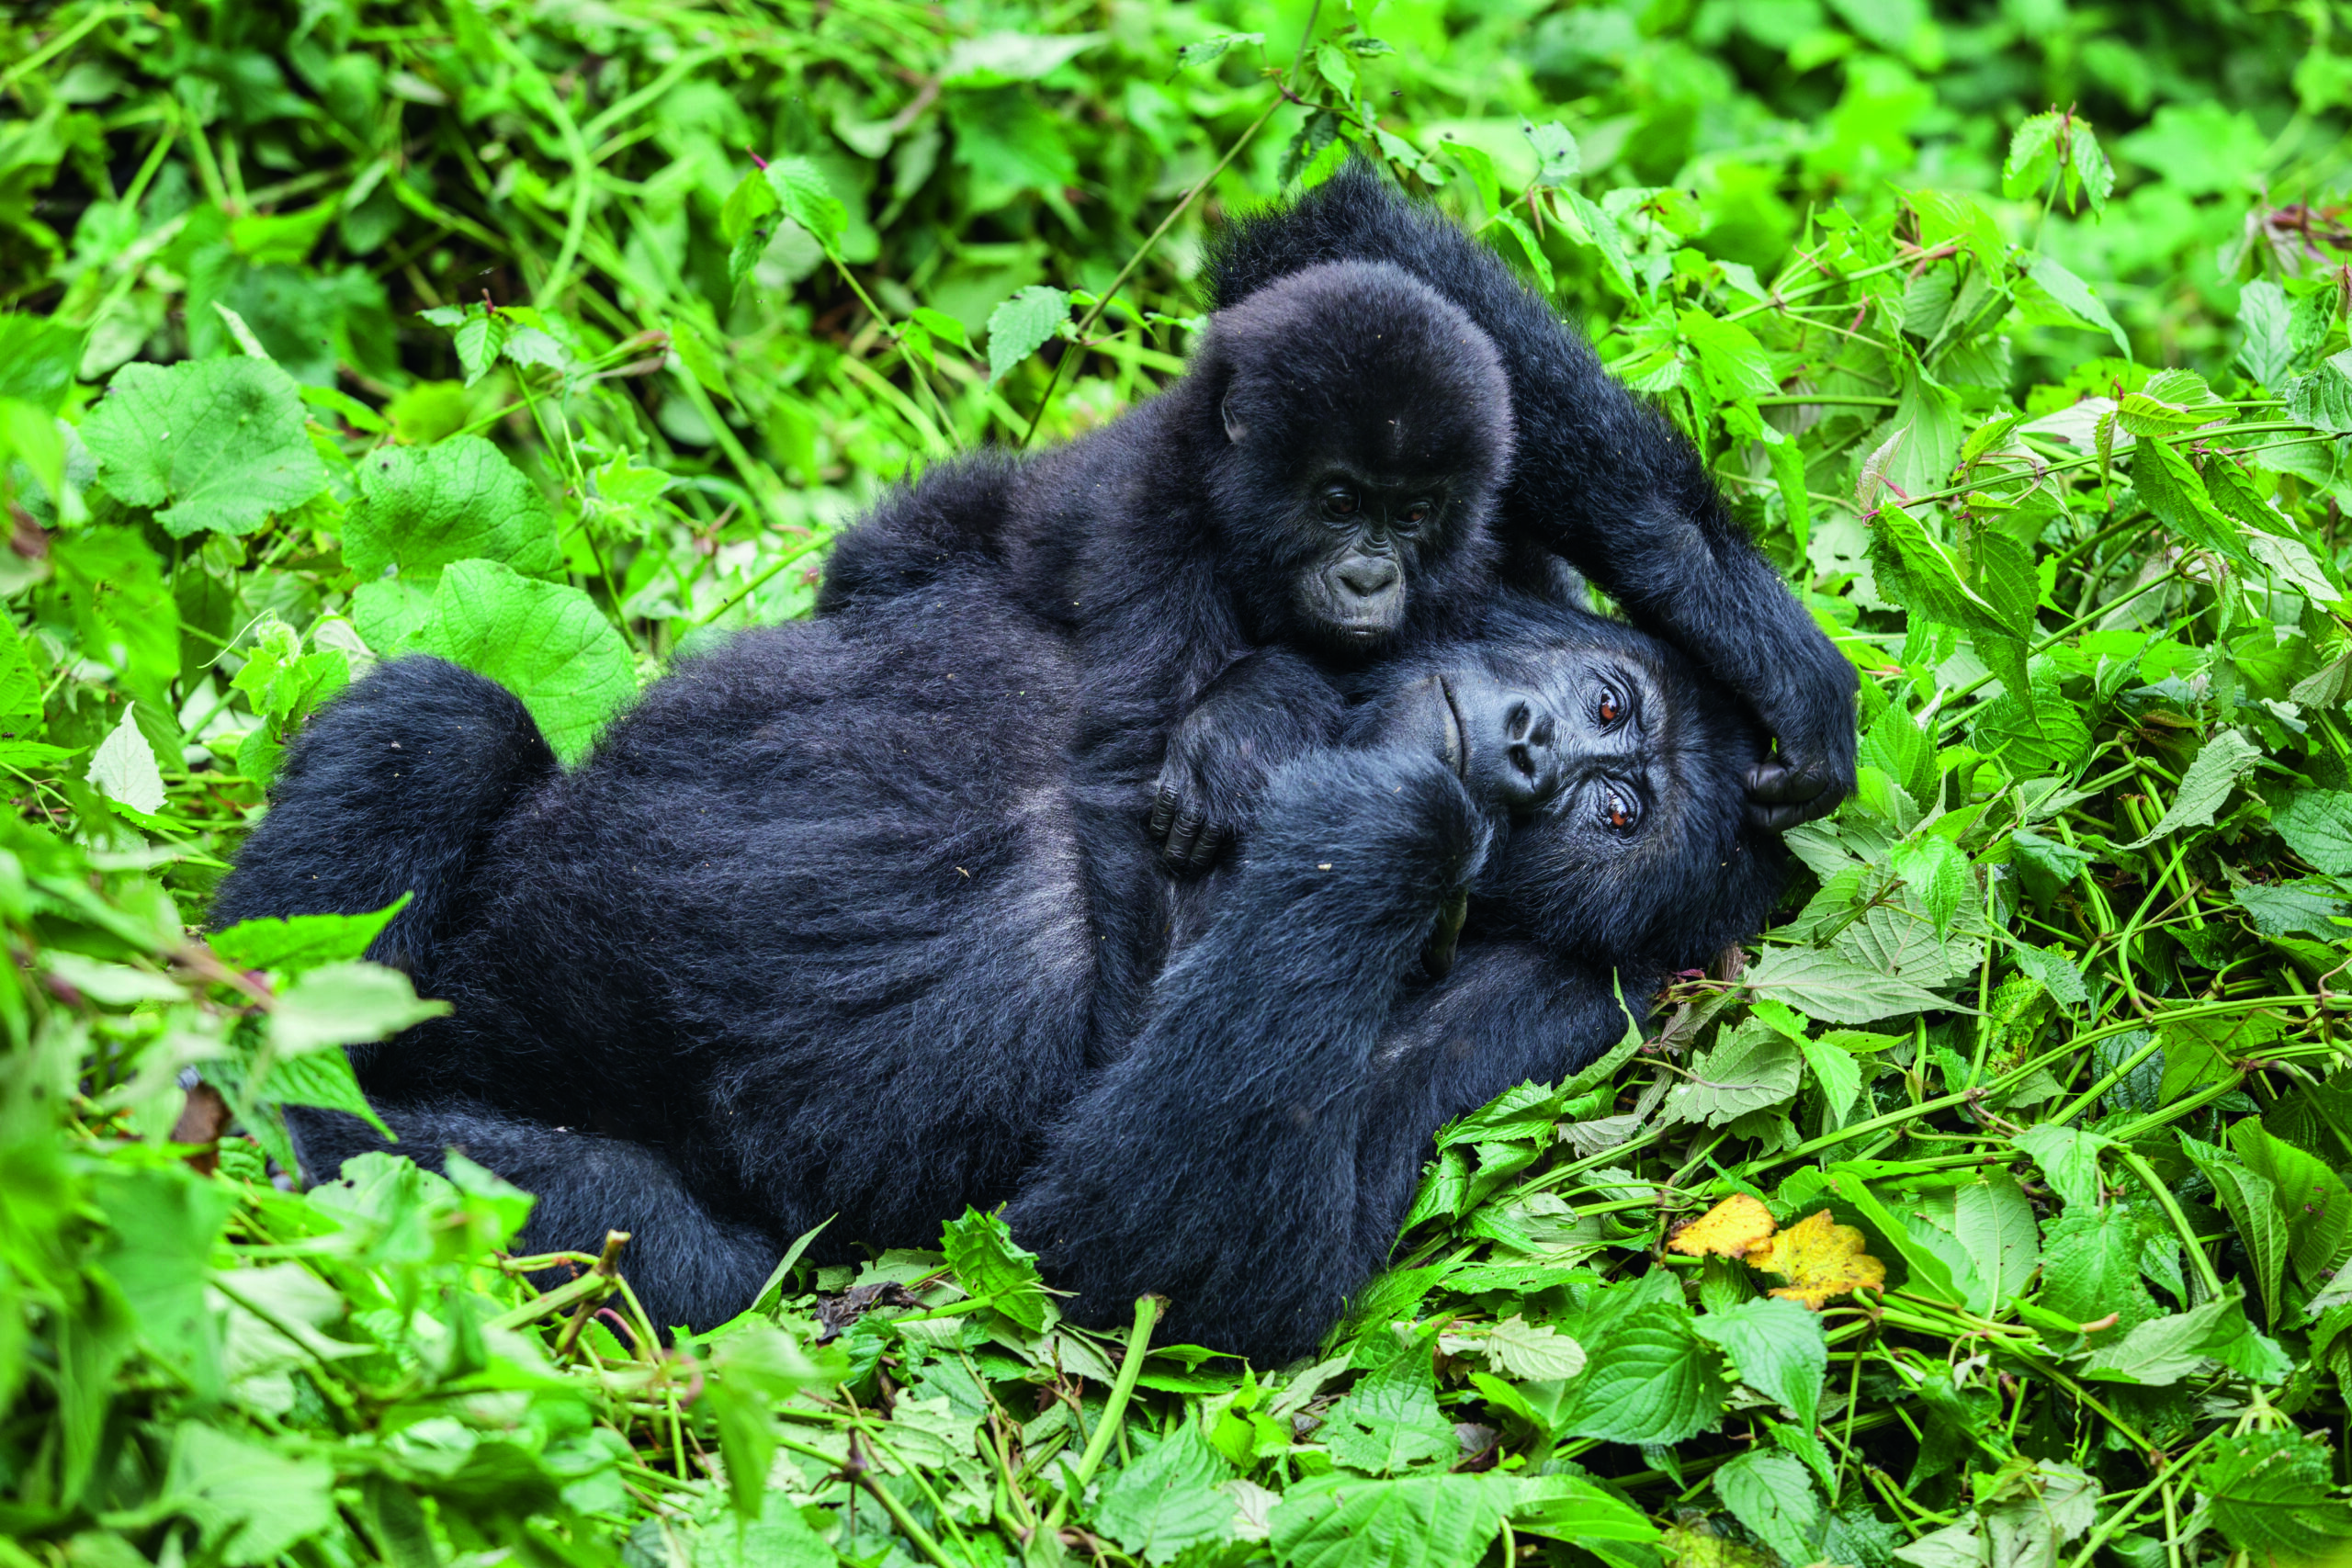 Mother and baby gorillas playing in wilderness